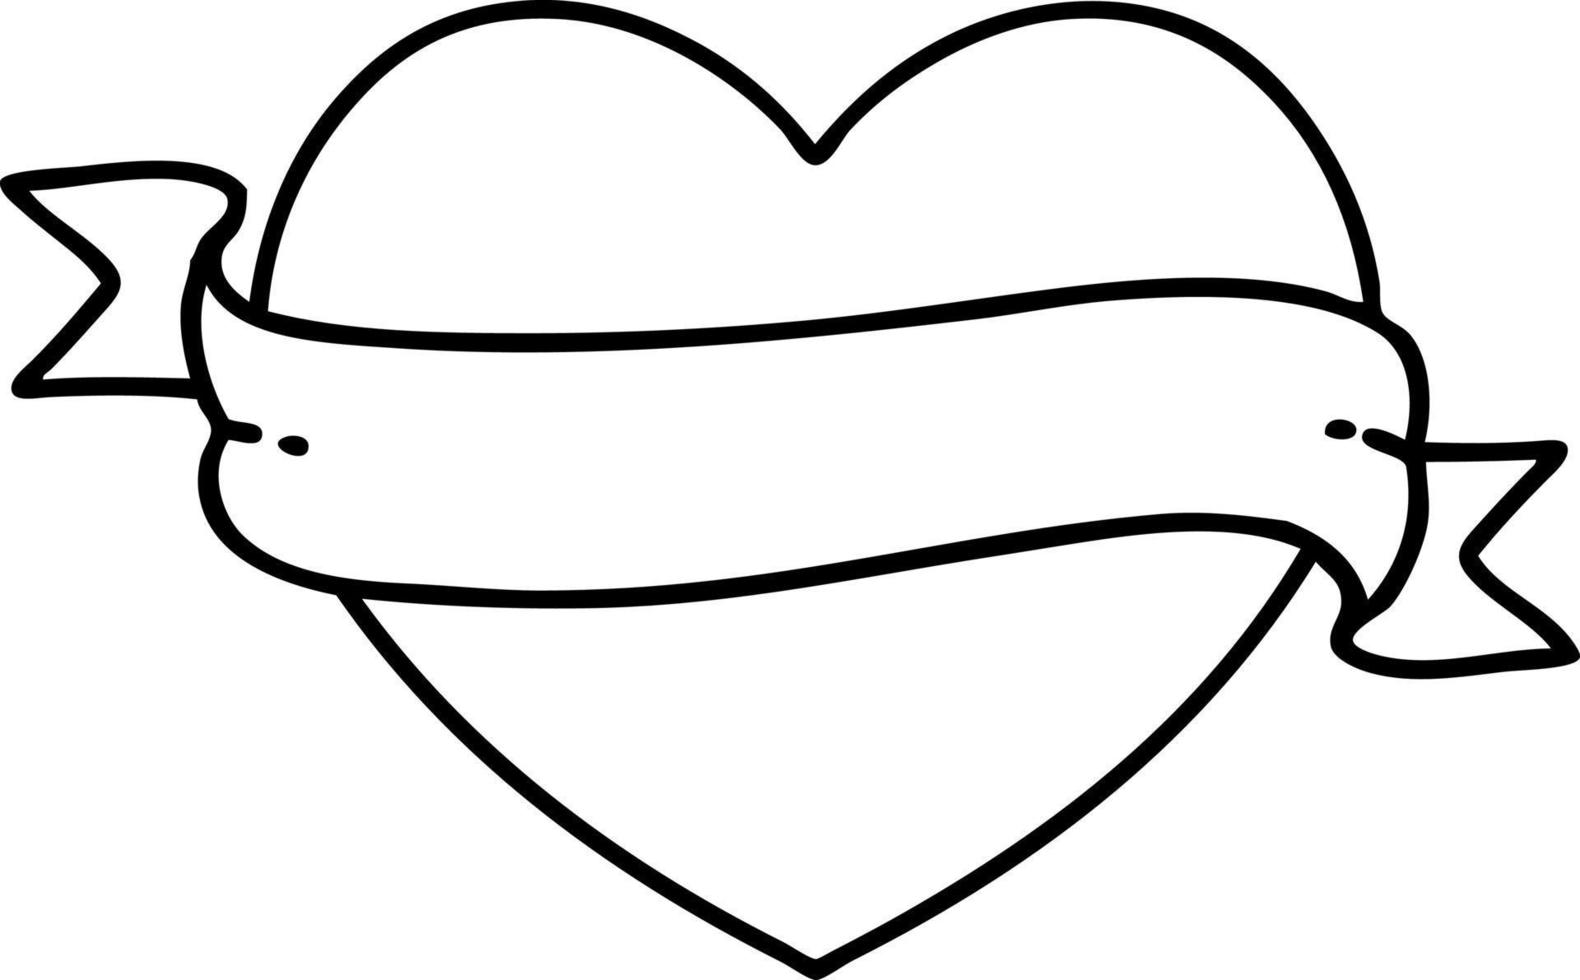 tattoo in black line style of a heart and banner vector